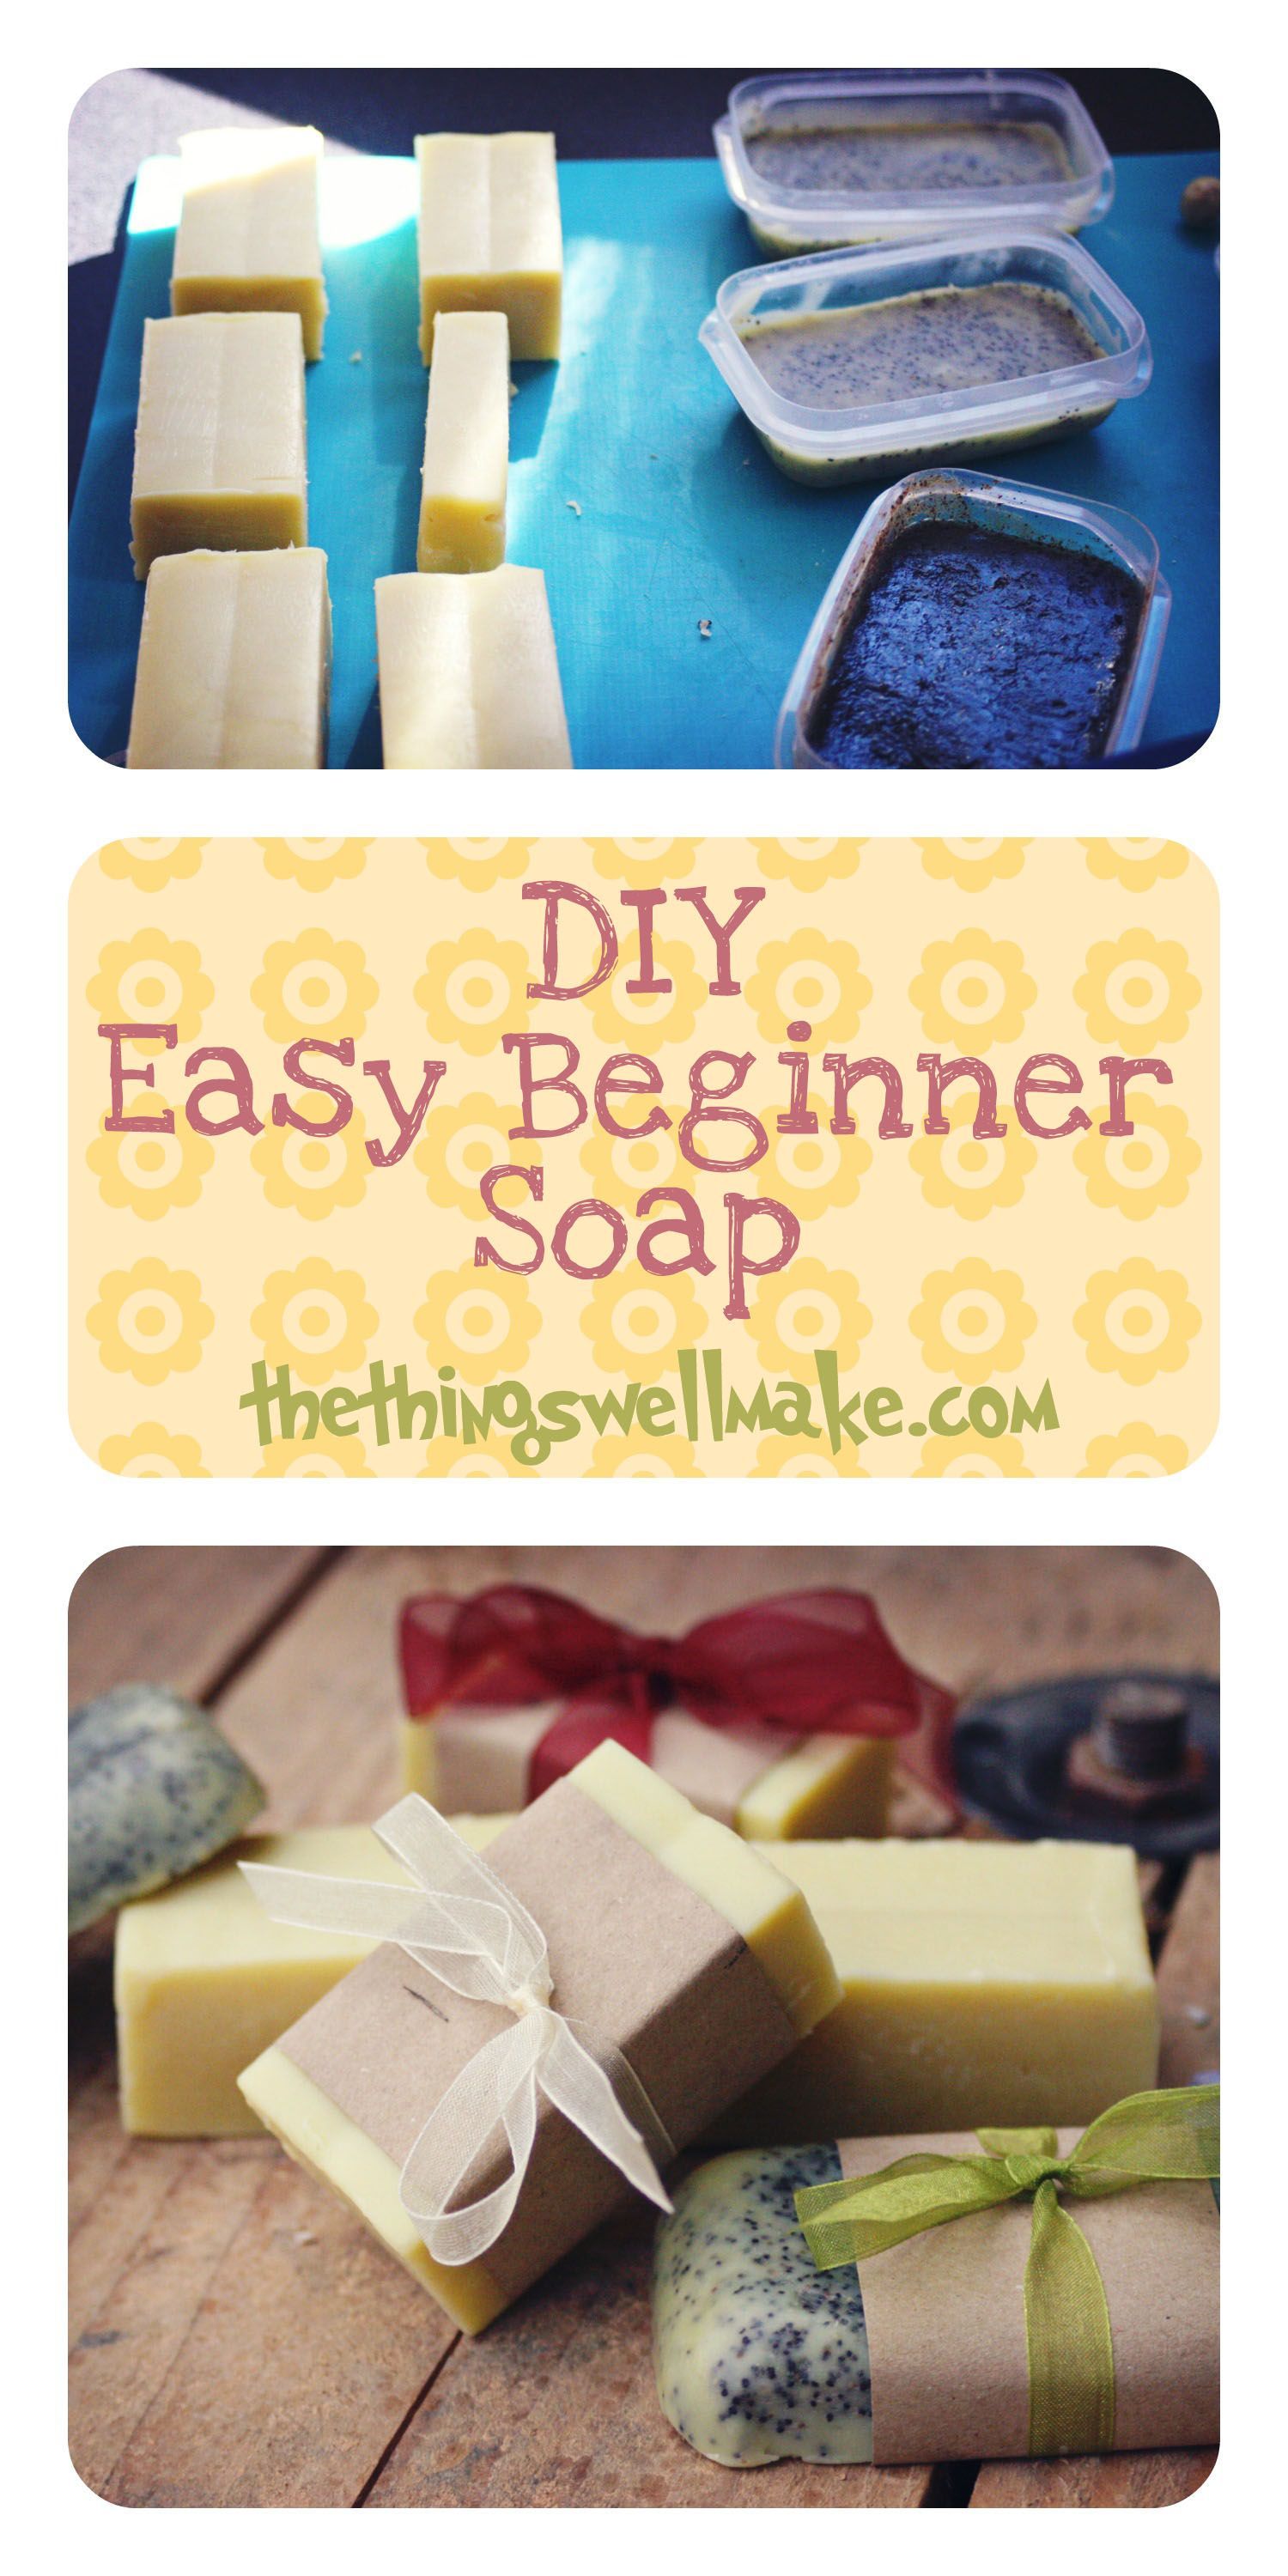 Making an Easy, Basic Beginner Soap, and Then Making it Fun!! - Making an Easy, Basic Beginner Soap, and Then Making it Fun!! -   17 diy Soap for beginners ideas